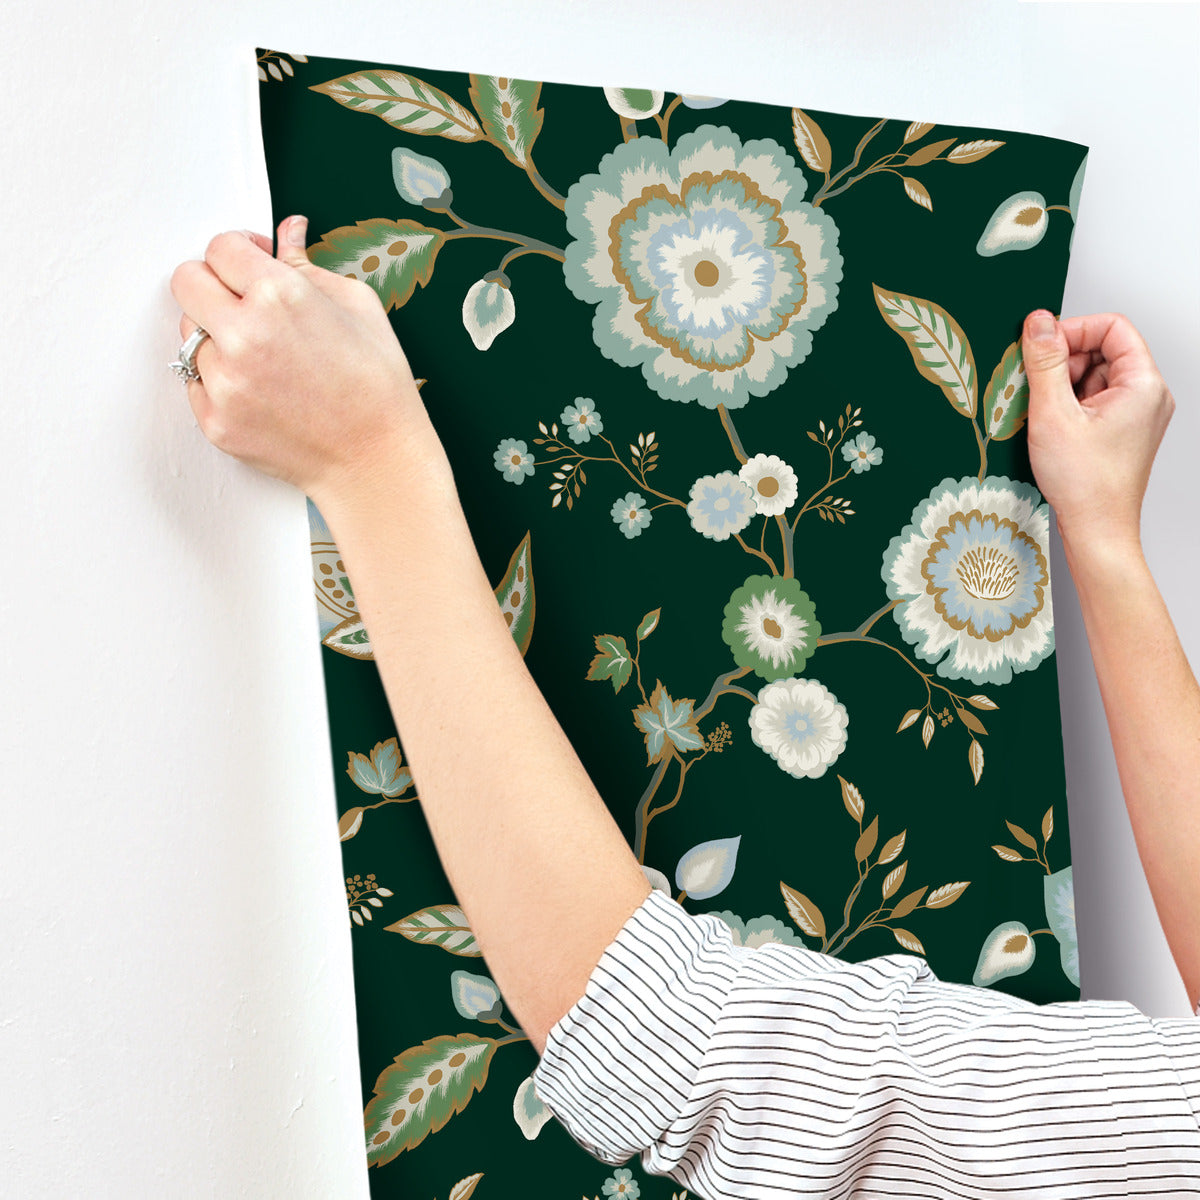 A person is applying Dahlia Blooms Midnight/Multi Wallpaper Black, Pink (60 Sq.Ft.) by York Wallcoverings. The person's hands are visible, holding the wallpaper in place, and they are wearing a striped shirt with sleeves rolled up.